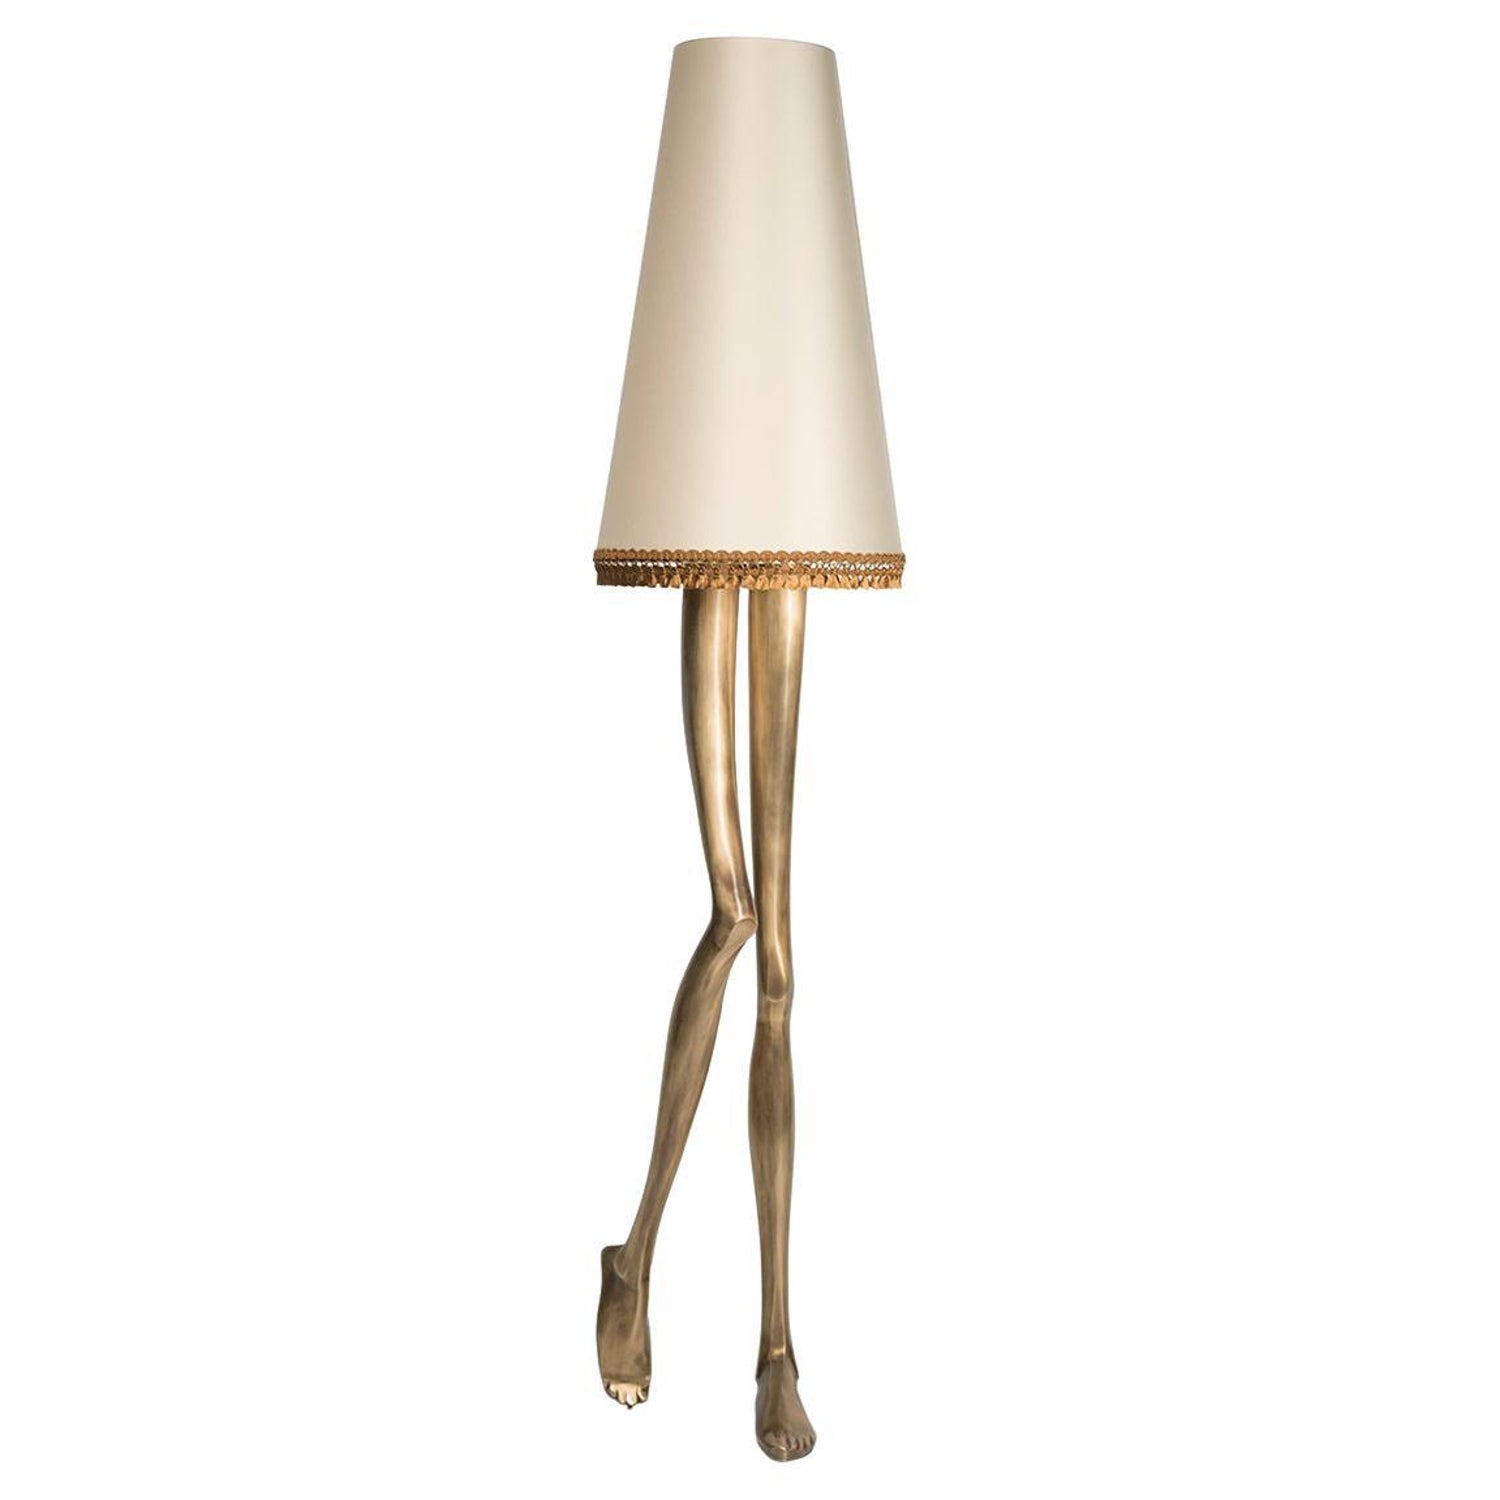 Contemporary Monroe Floor Lamp Aged Brass Cast, Lampshade with Tassel Fringe  For Sale at 1stDibs